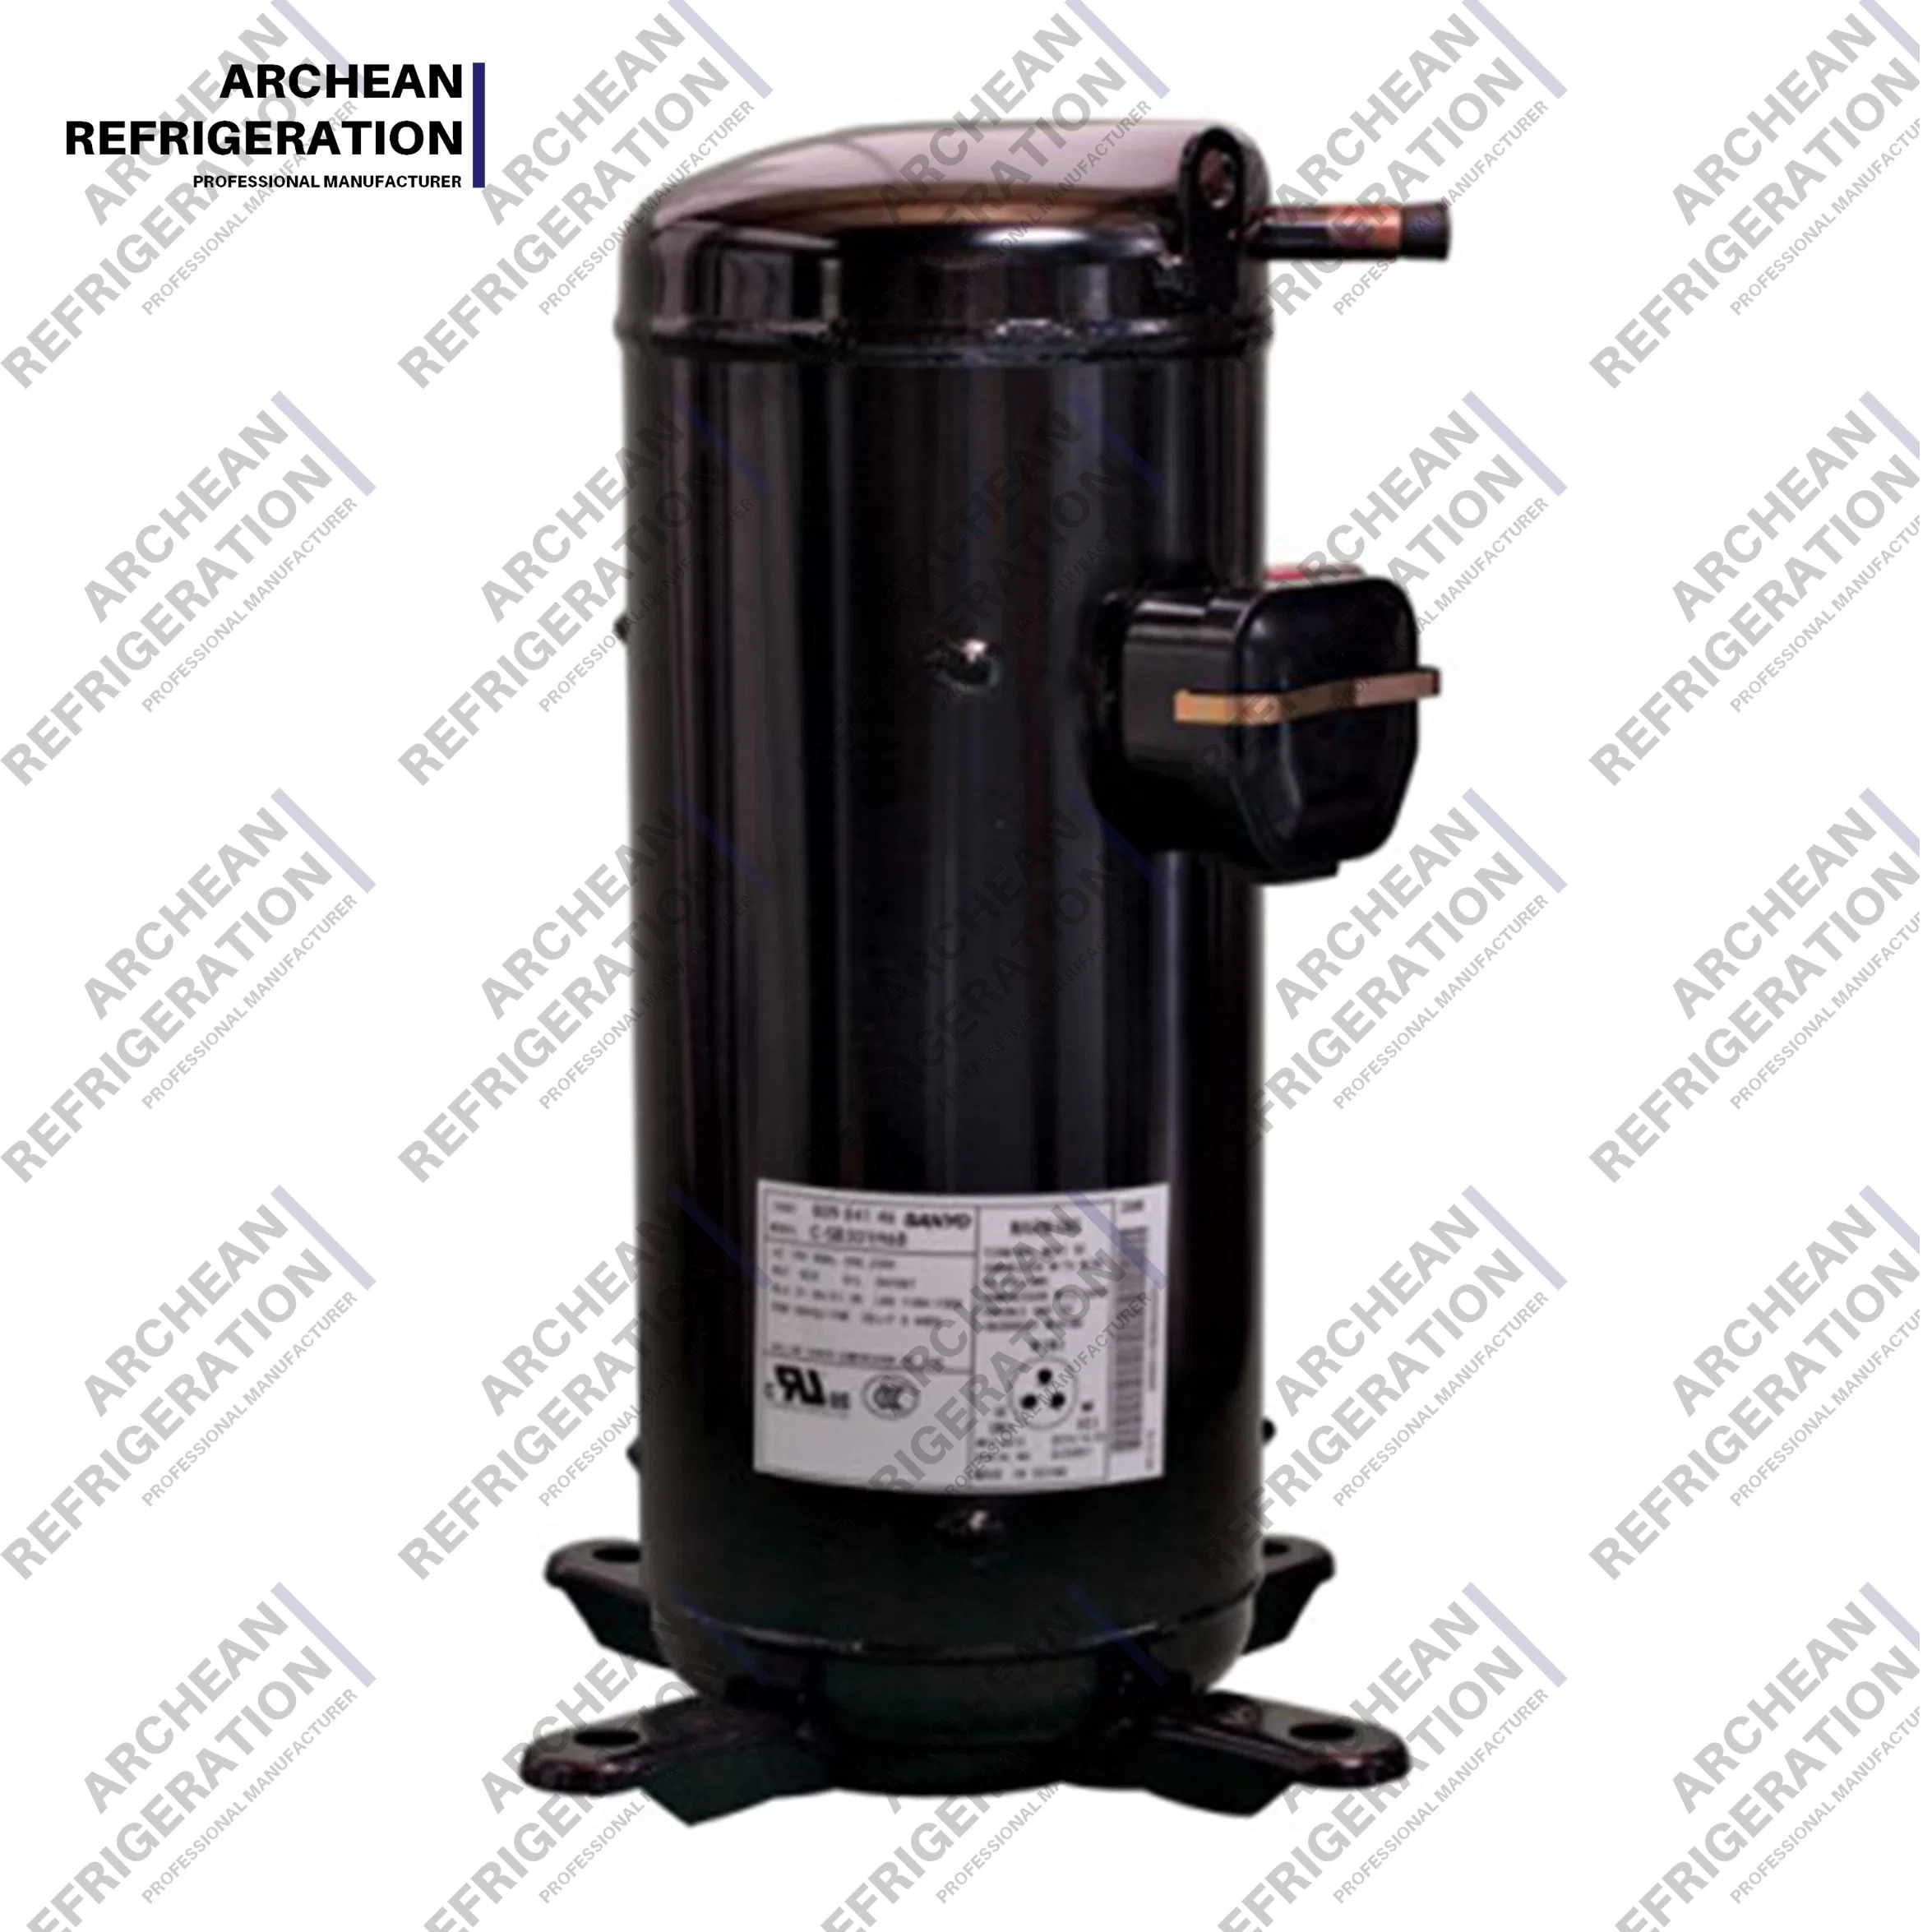 High Quality Panasonic SANYO Scroll Compressor for C-Sc903h8h-3 Efrigeration Compressor Cooling Air Conditioning with Reasonable Price